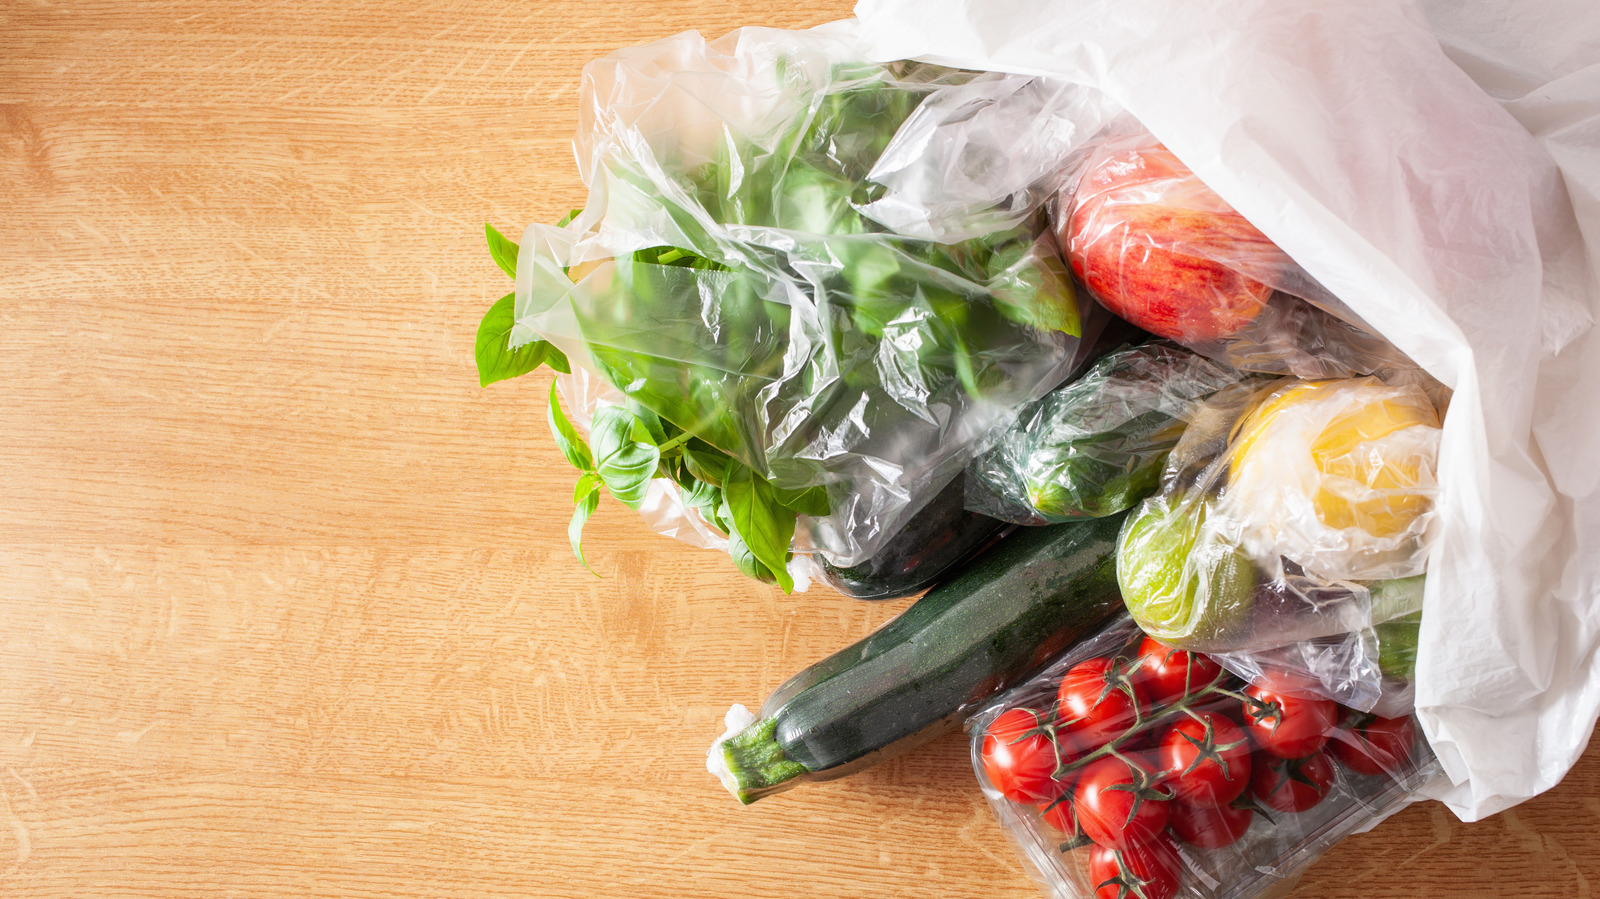 https://www.tastingtable.com/img/gallery/those-plastic-bags-from-the-grocery-store-wont-keep-your-produce-fresh/l-intro-1688146770.jpg